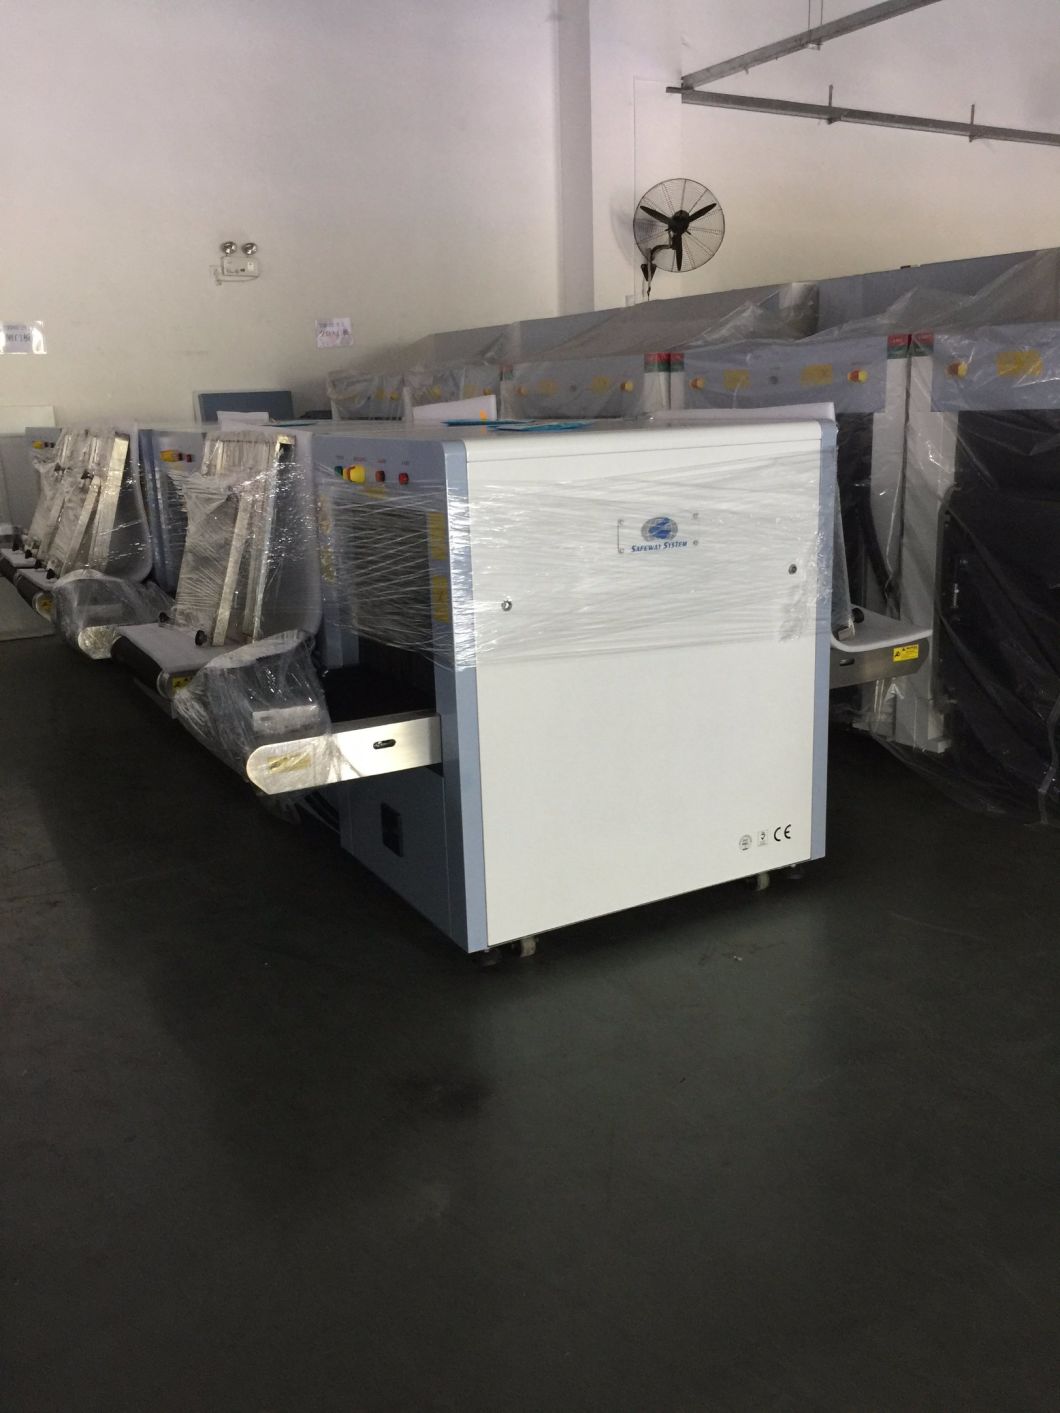 Middle Size X-ray Baggage and Luggage, Parcel Security Inspection Scanning Equipment